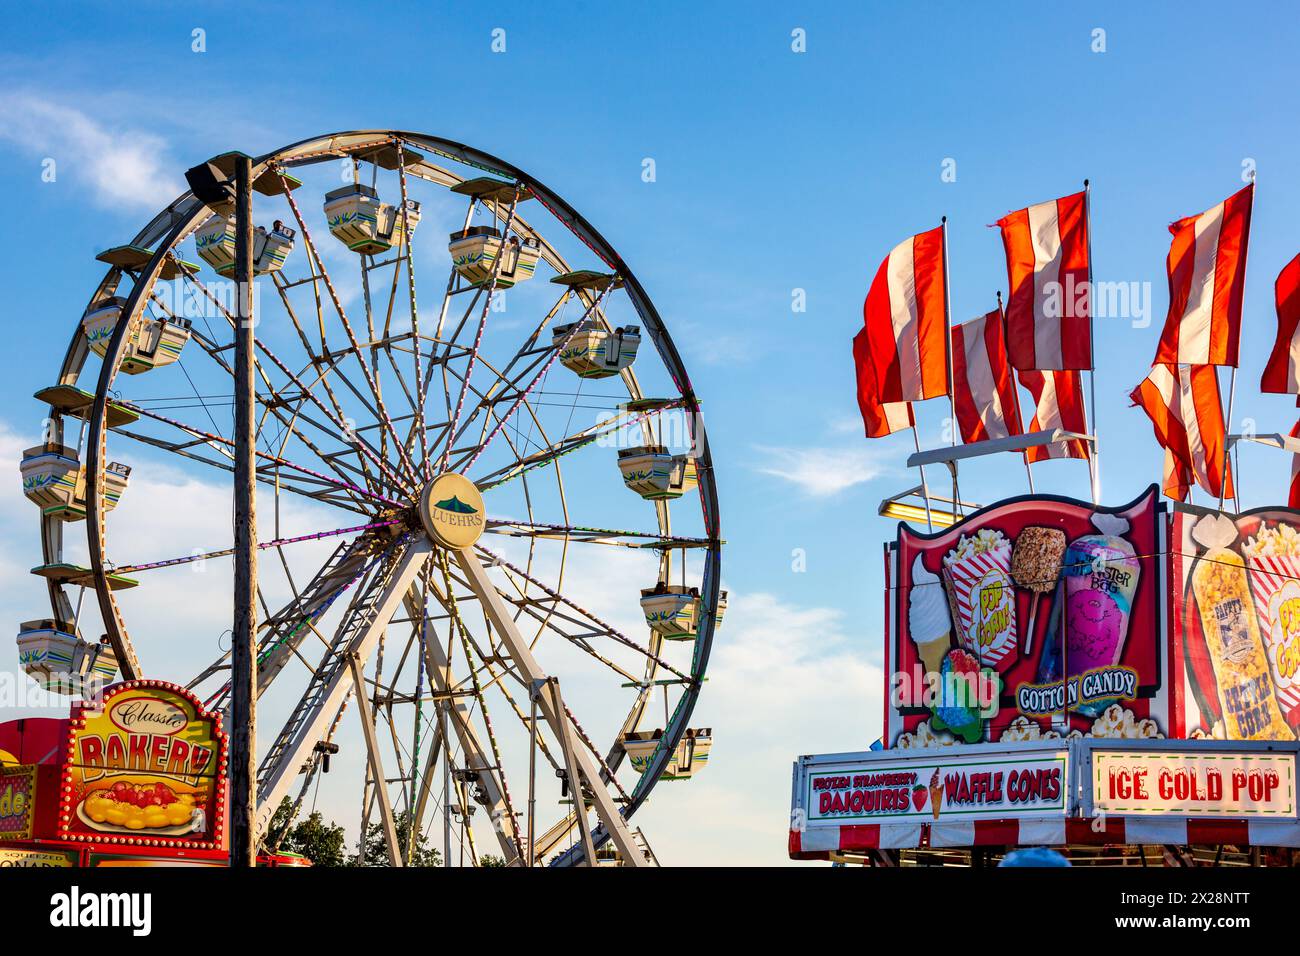 A Ferris Wheel can be seen beyond the junk food vendors at the Allen County Fairgrounds in Fort Wayne, Indiana, USA. Stock Photo